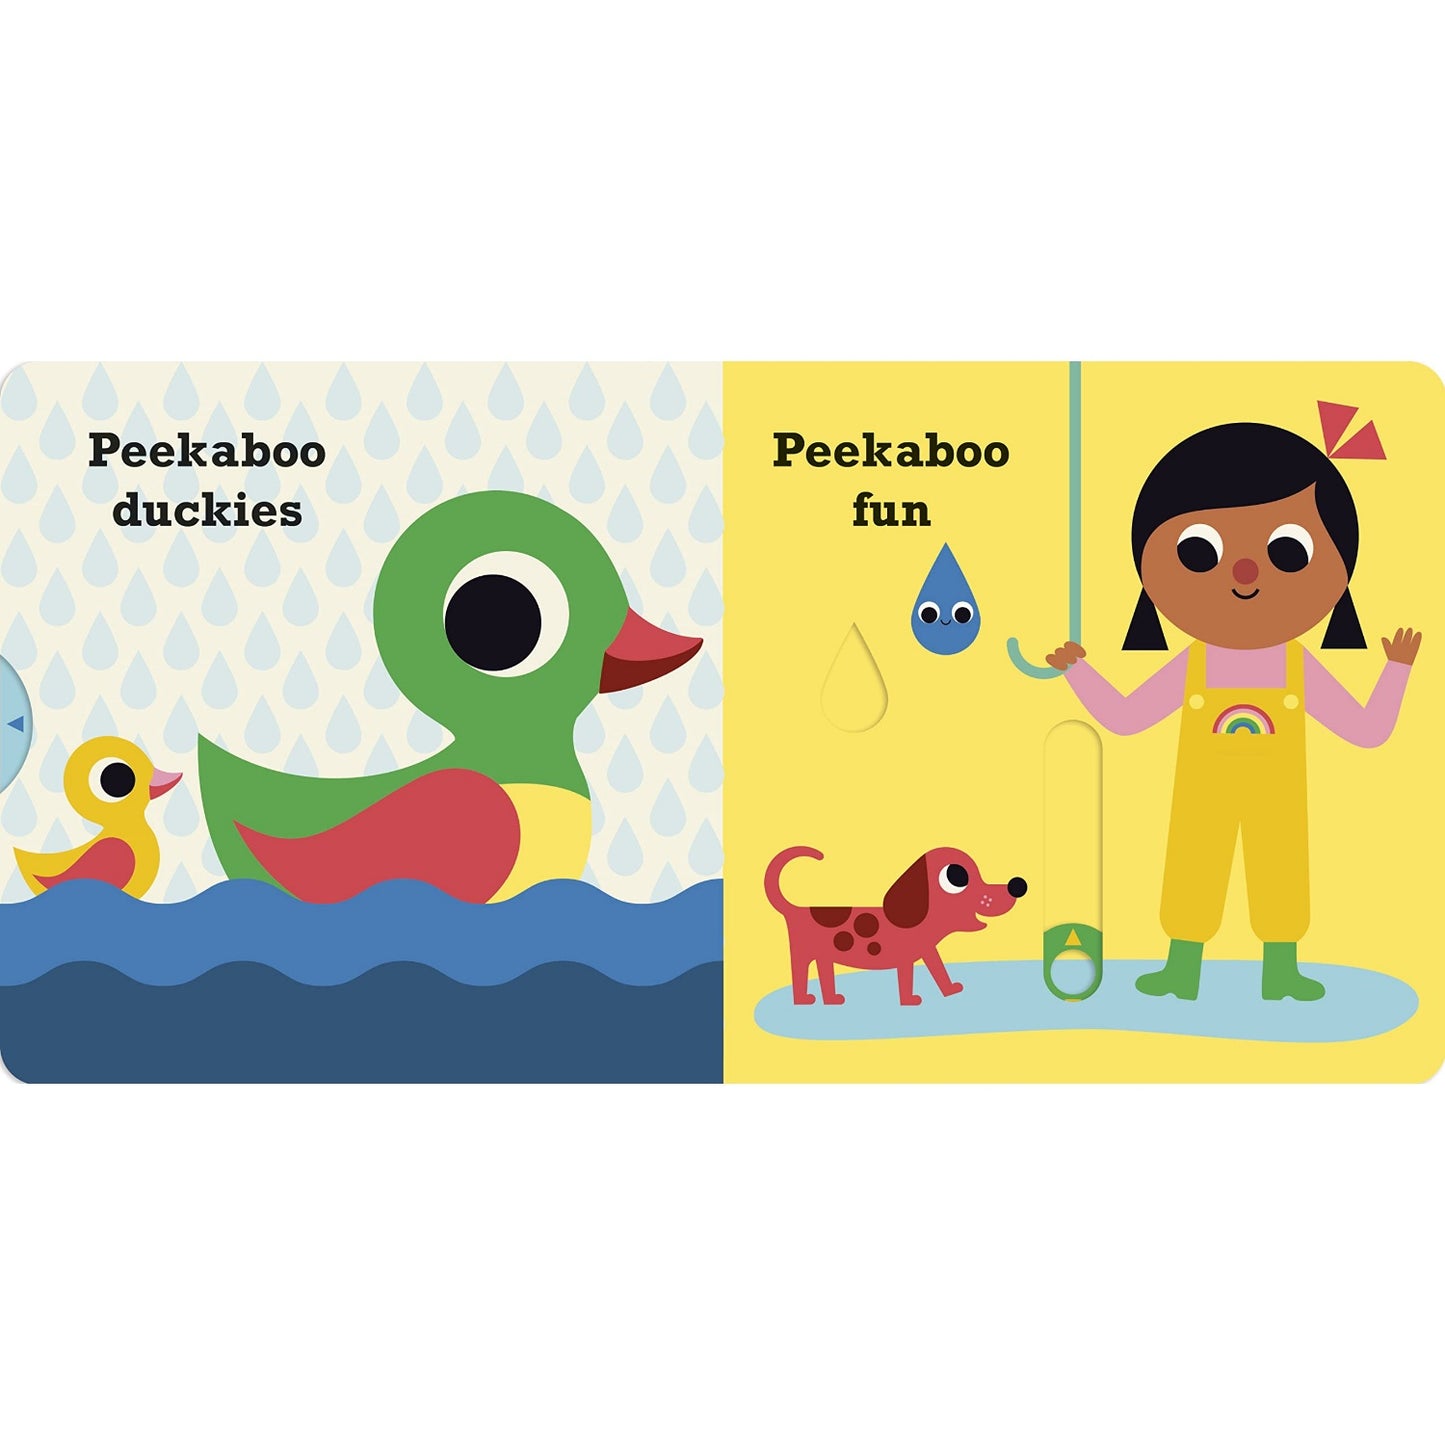 Peekaboo Chick | Interactive Board Book for Babies & Toddlers